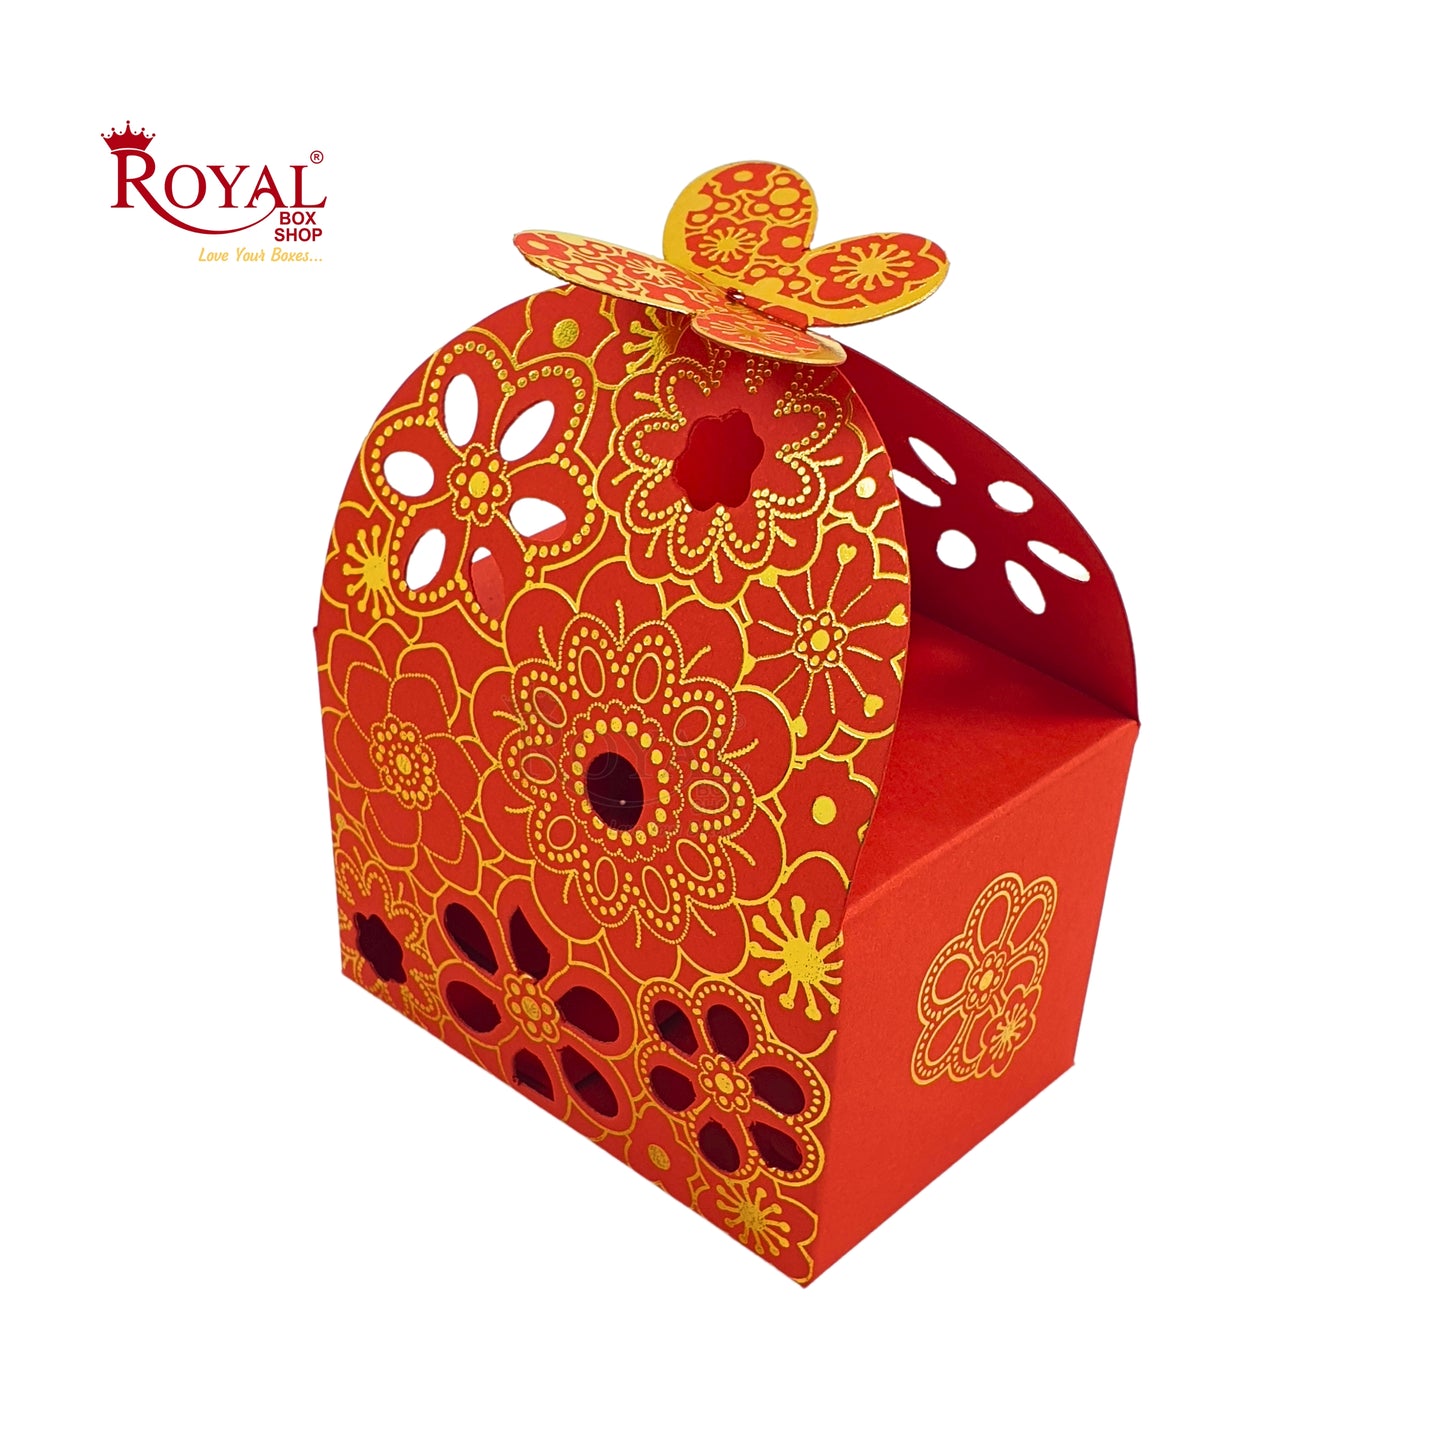 Flower Butterfly Hollow Candy Box Cookie Gift Boxes I Red Gold Foil Leafing Print I 3.5x2.25x2.4 inches